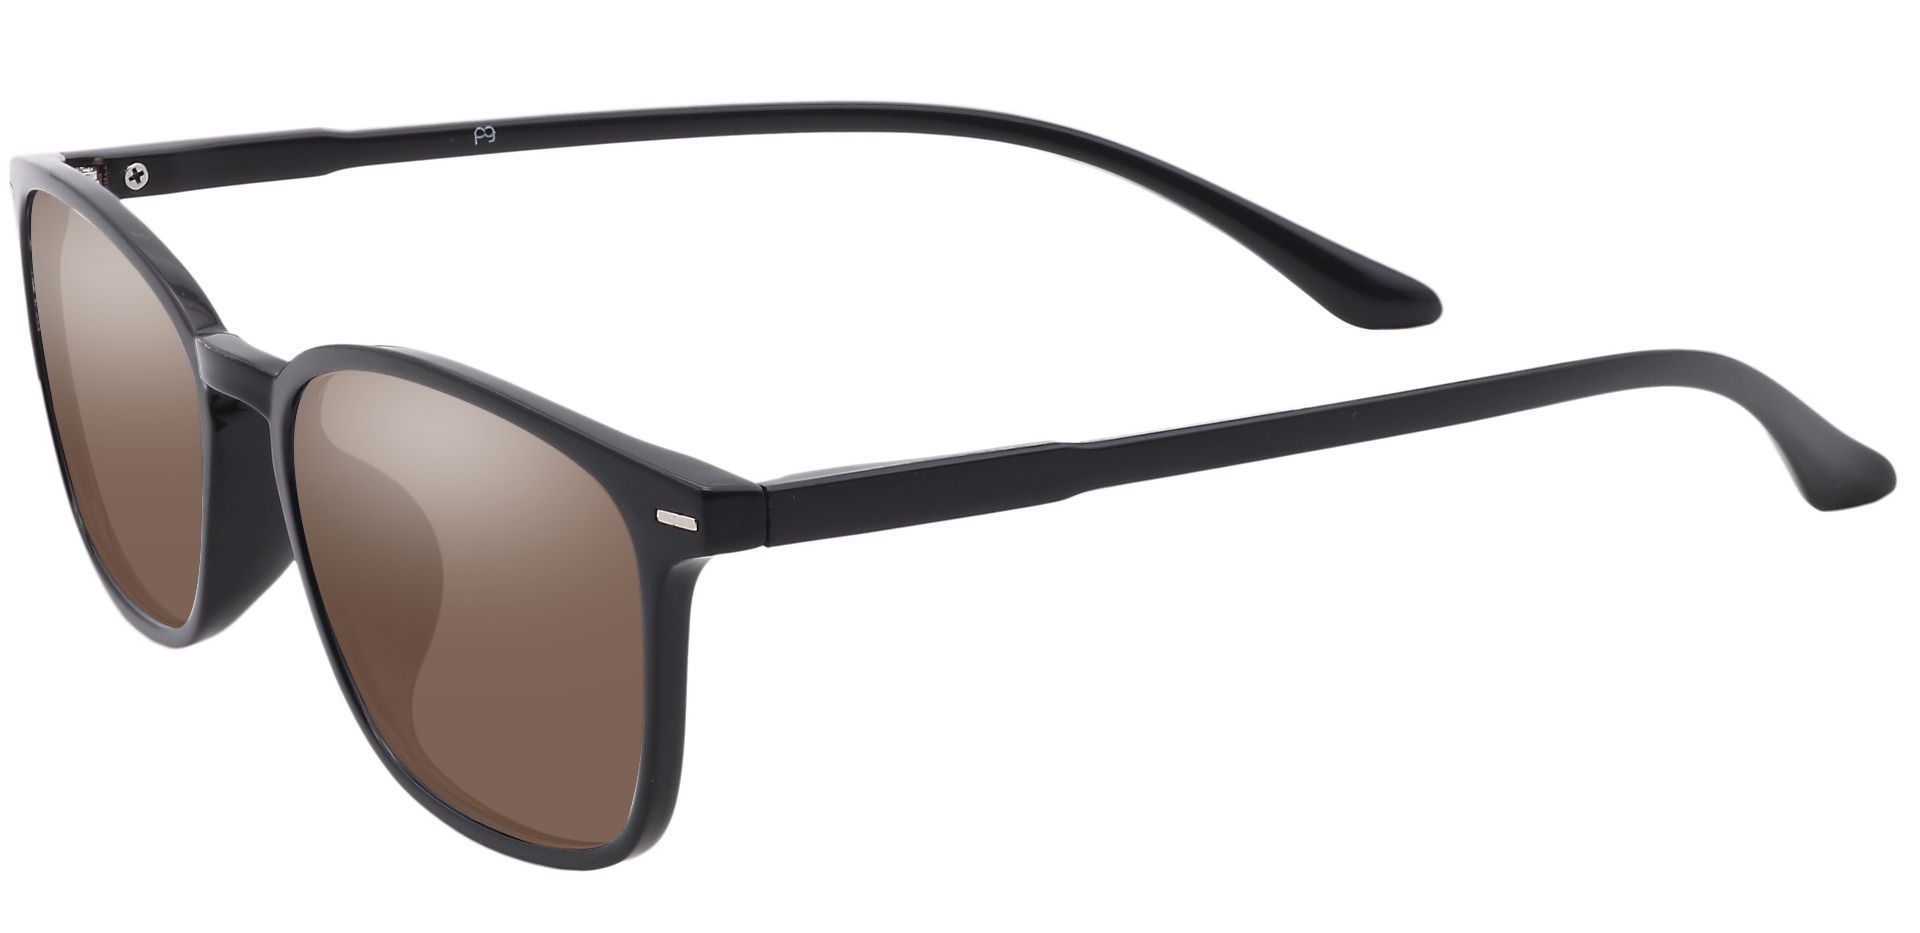 Cabo Oval Non-Rx Sunglasses - Black Frame With Brown Lenses